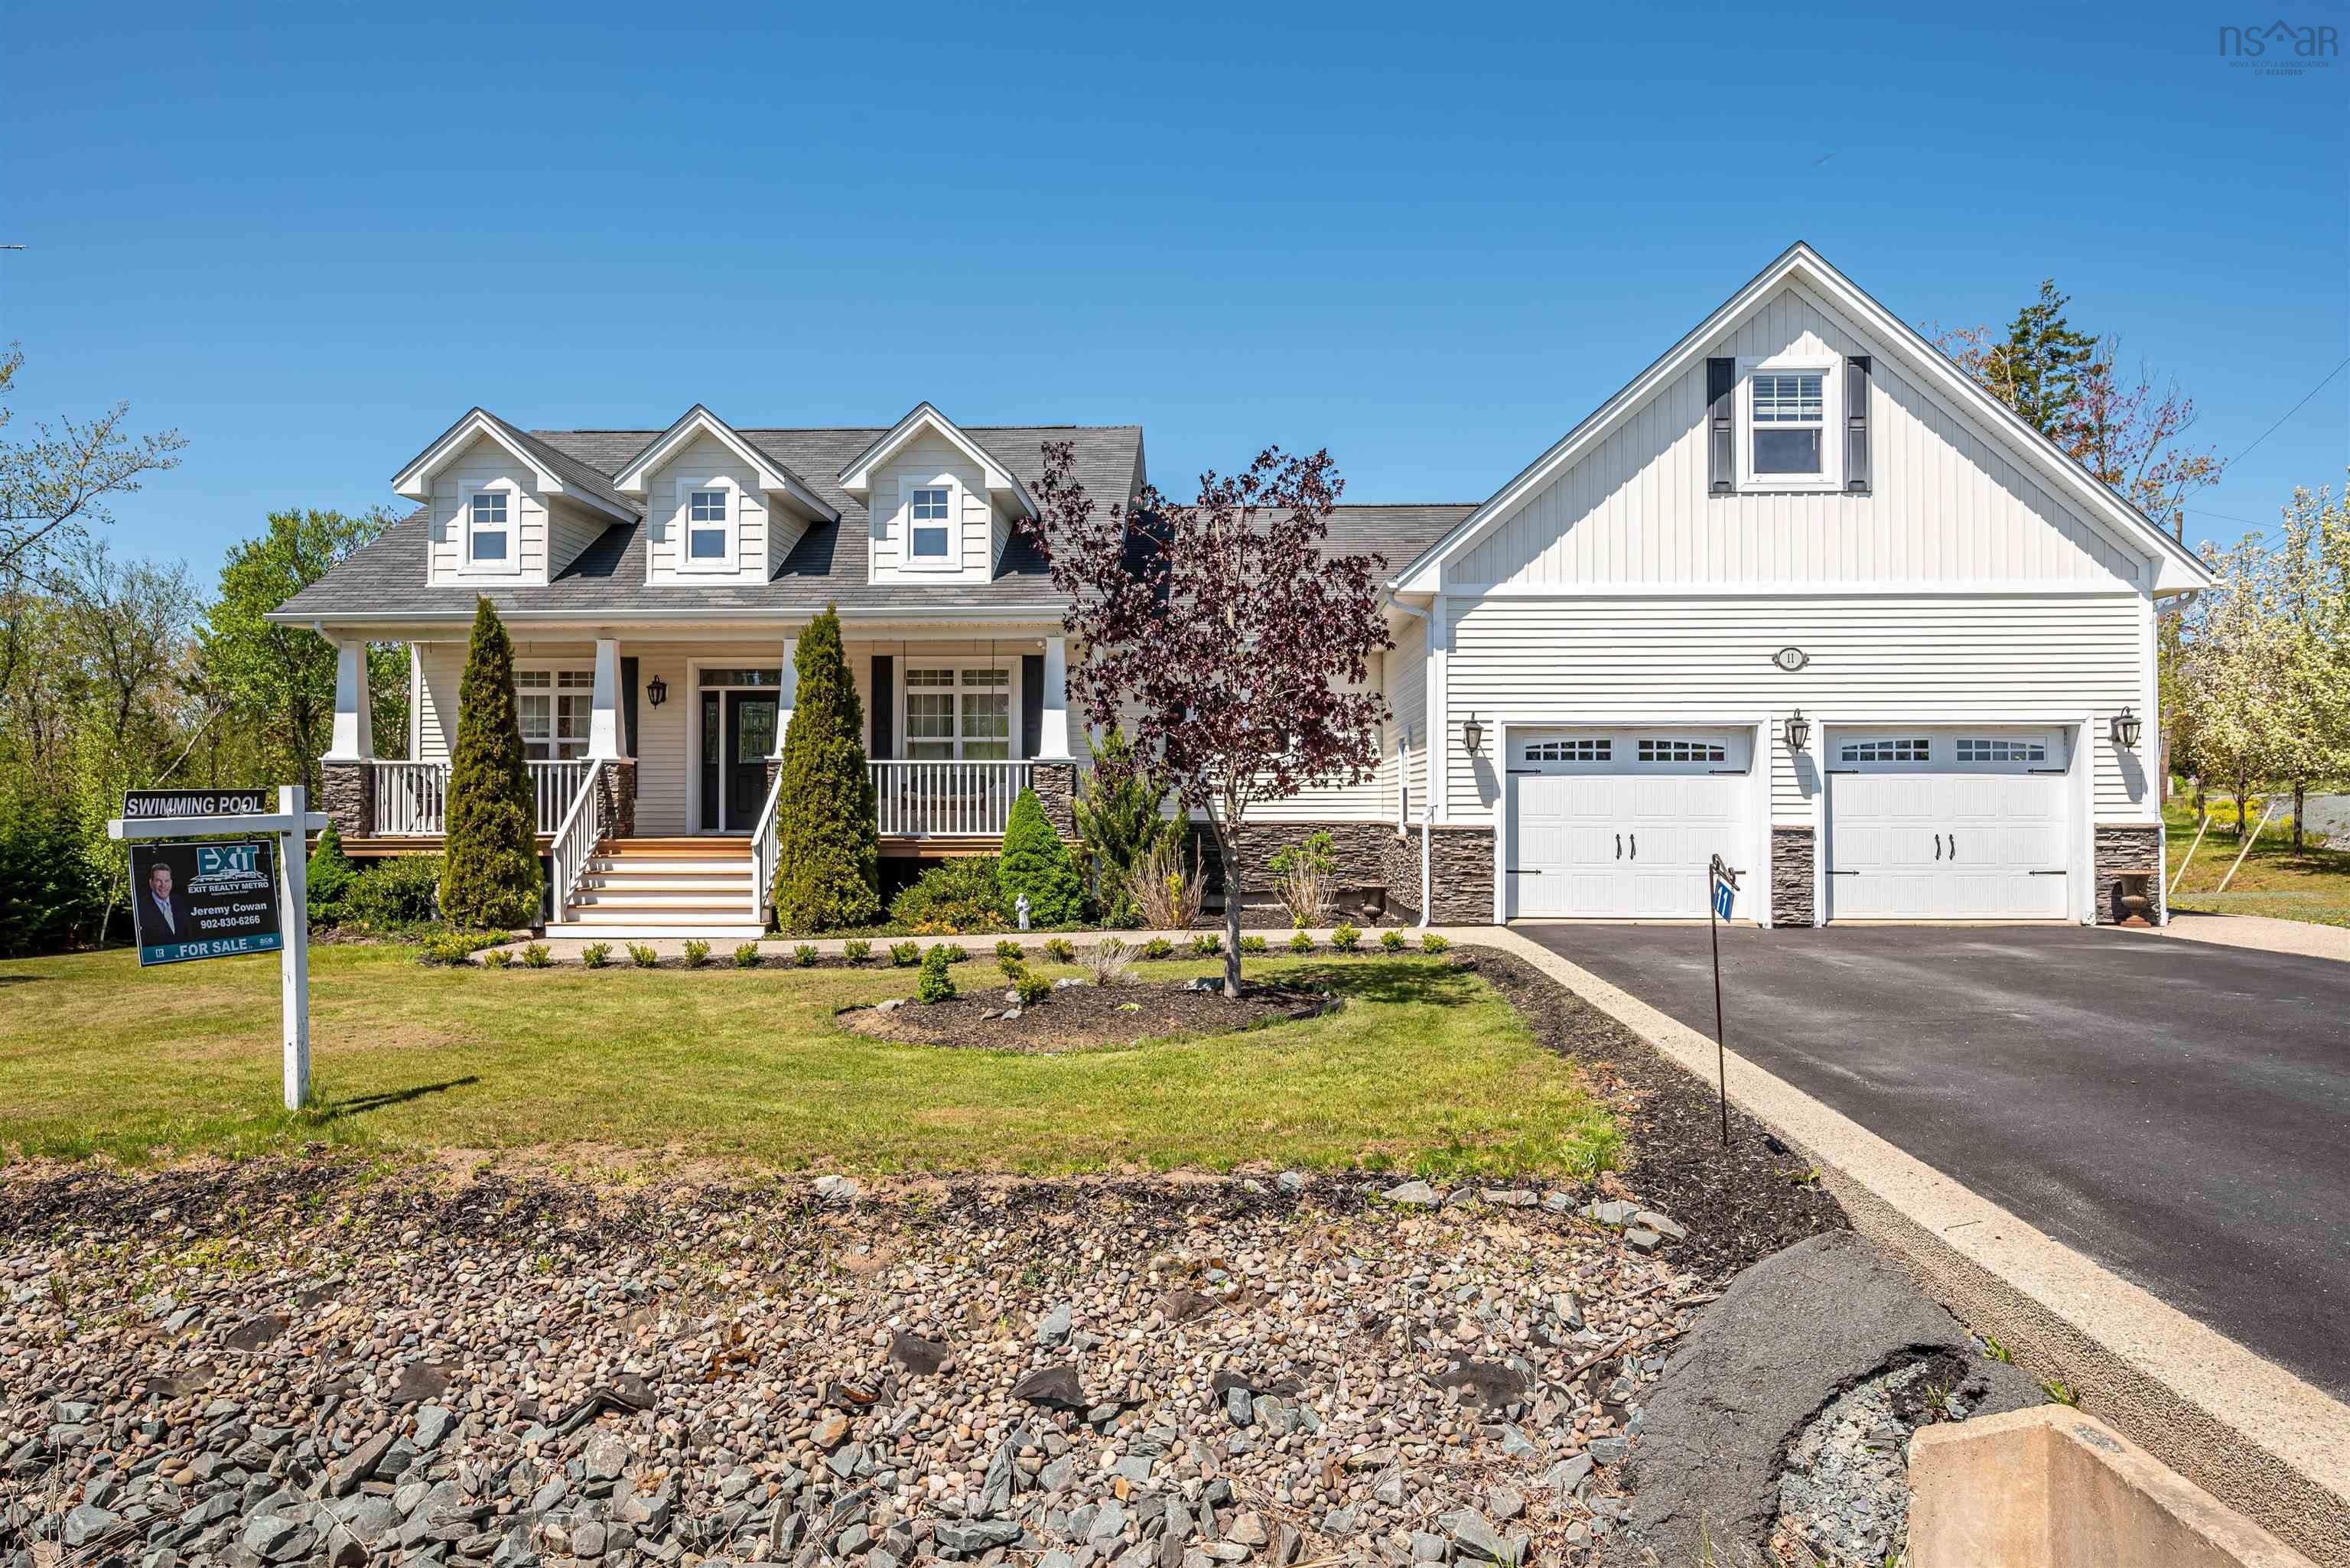 Main Photo: 11 Dunsmore Drive in Fall River: 30-Waverley, Fall River, Oakfiel Residential for sale (Halifax-Dartmouth)  : MLS®# 202304271